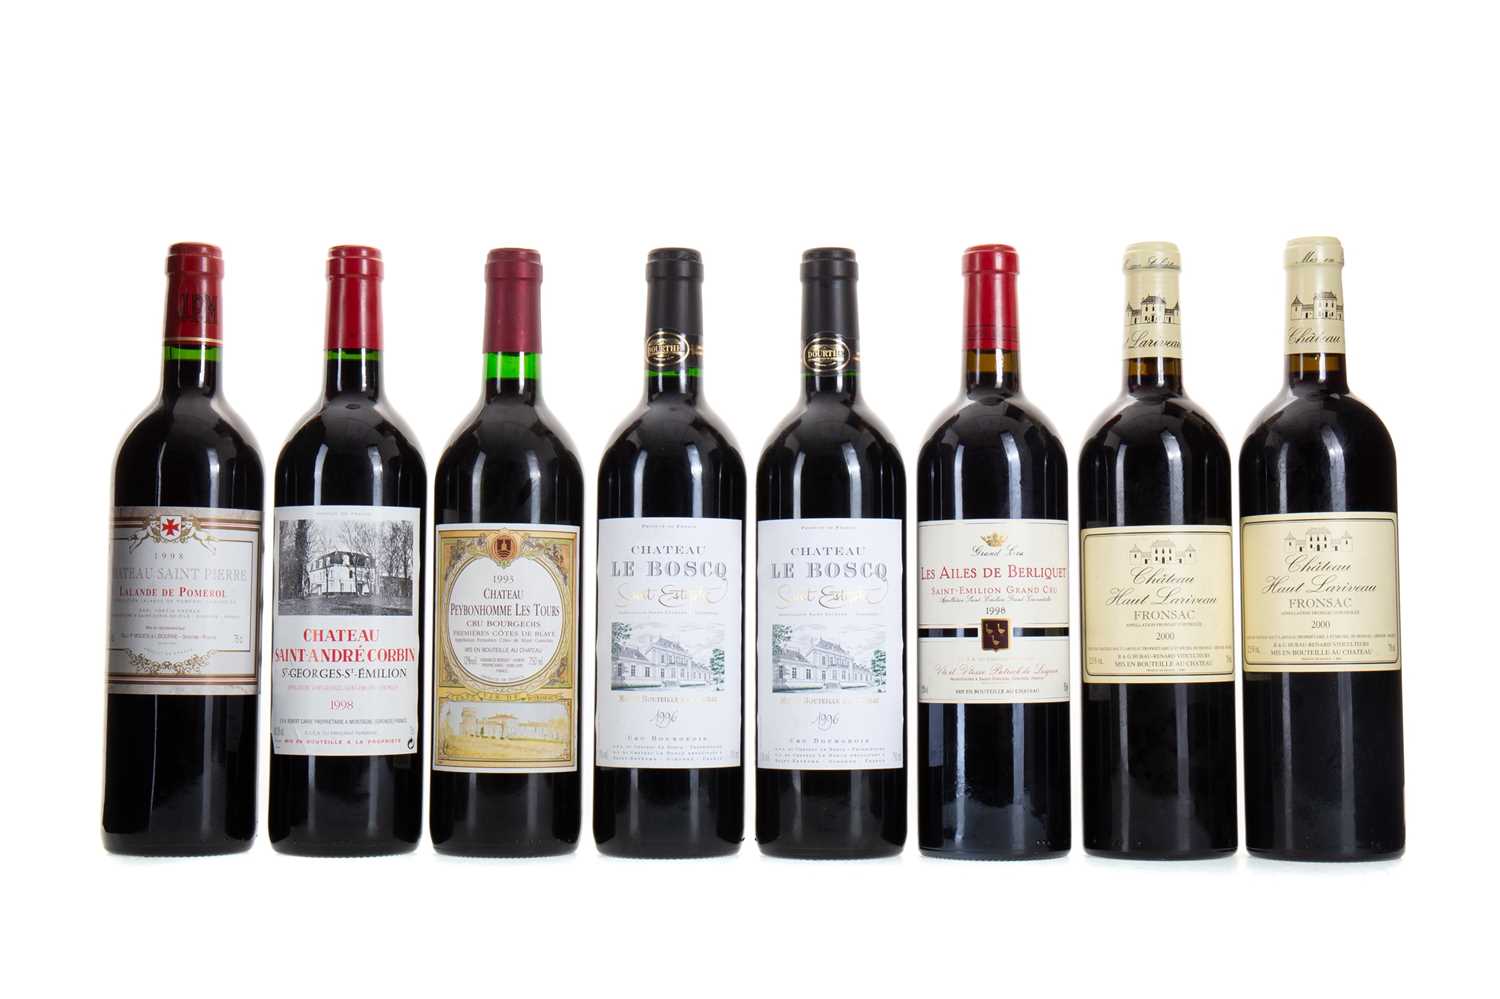 8 BOTTLES OF FRENCH RED WINE FROM THE BORDEAUX REGION INCLUDING CHATEAU SAINT-ANDRE CORBIN 1998 ST-G